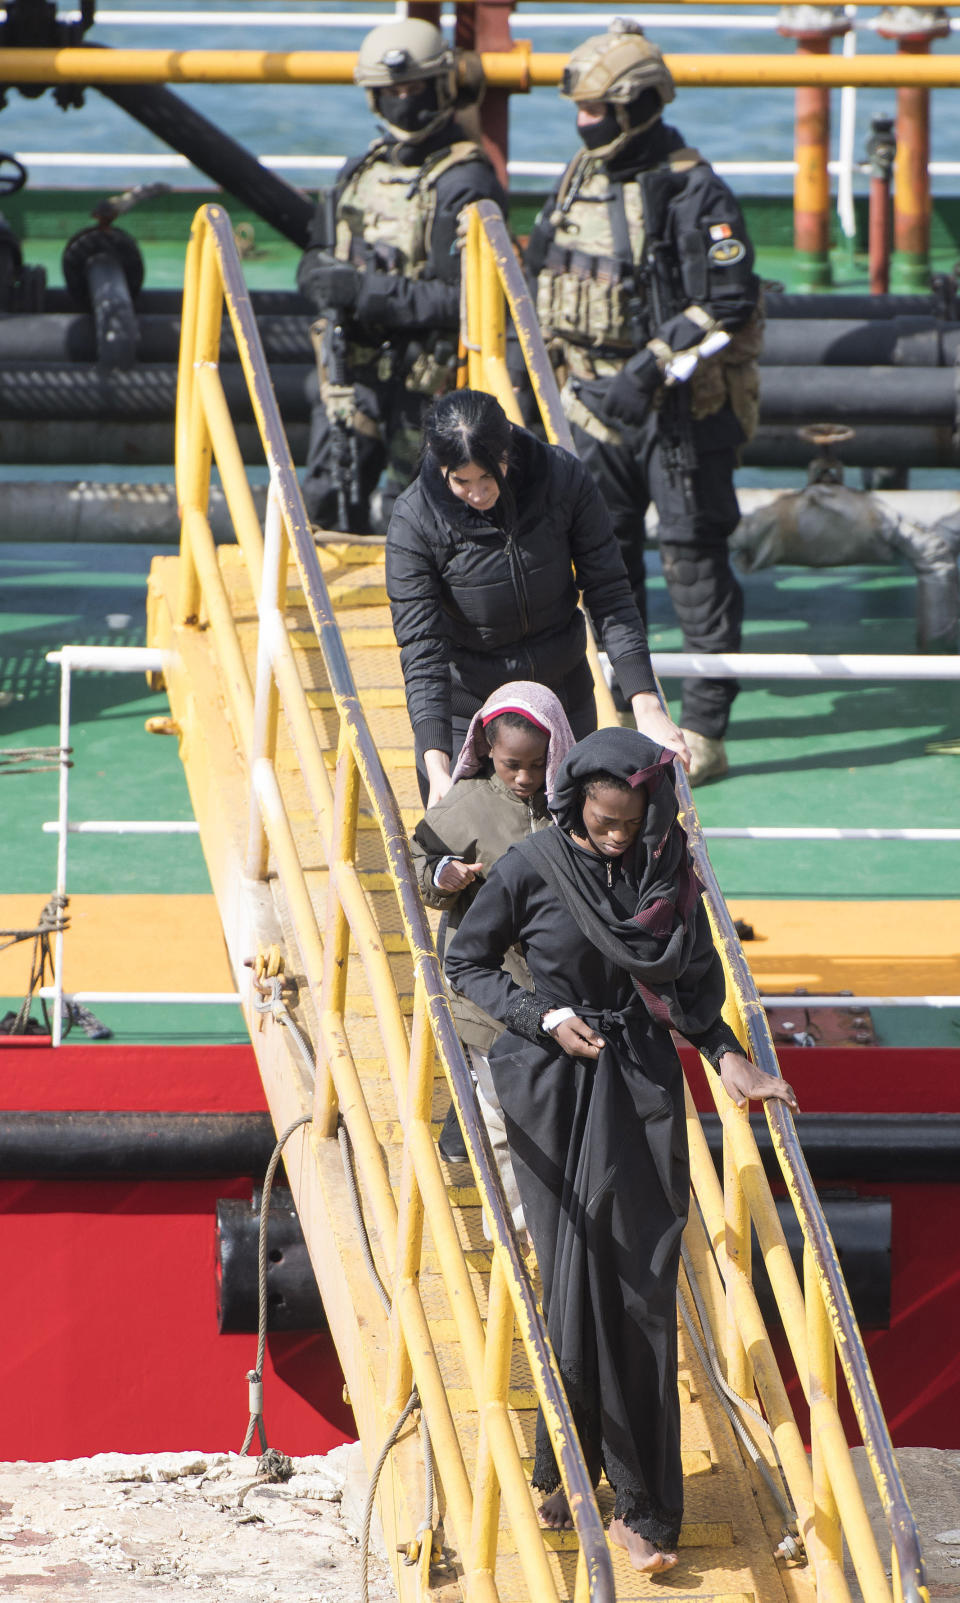 Armed forces stand onboard the Turkish oil tanker El Hiblu 1, which was hijacked by migrants, as migrants start to disembark in Valletta, Malta, Thursday March 28, 2019. A Maltese special operations team on Thursday boarded a tanker that had been hijacked by migrants rescued at sea, and returned control to the captain, before escorting it to a Maltese port. (AP Photo/Rene' Rossignaud)